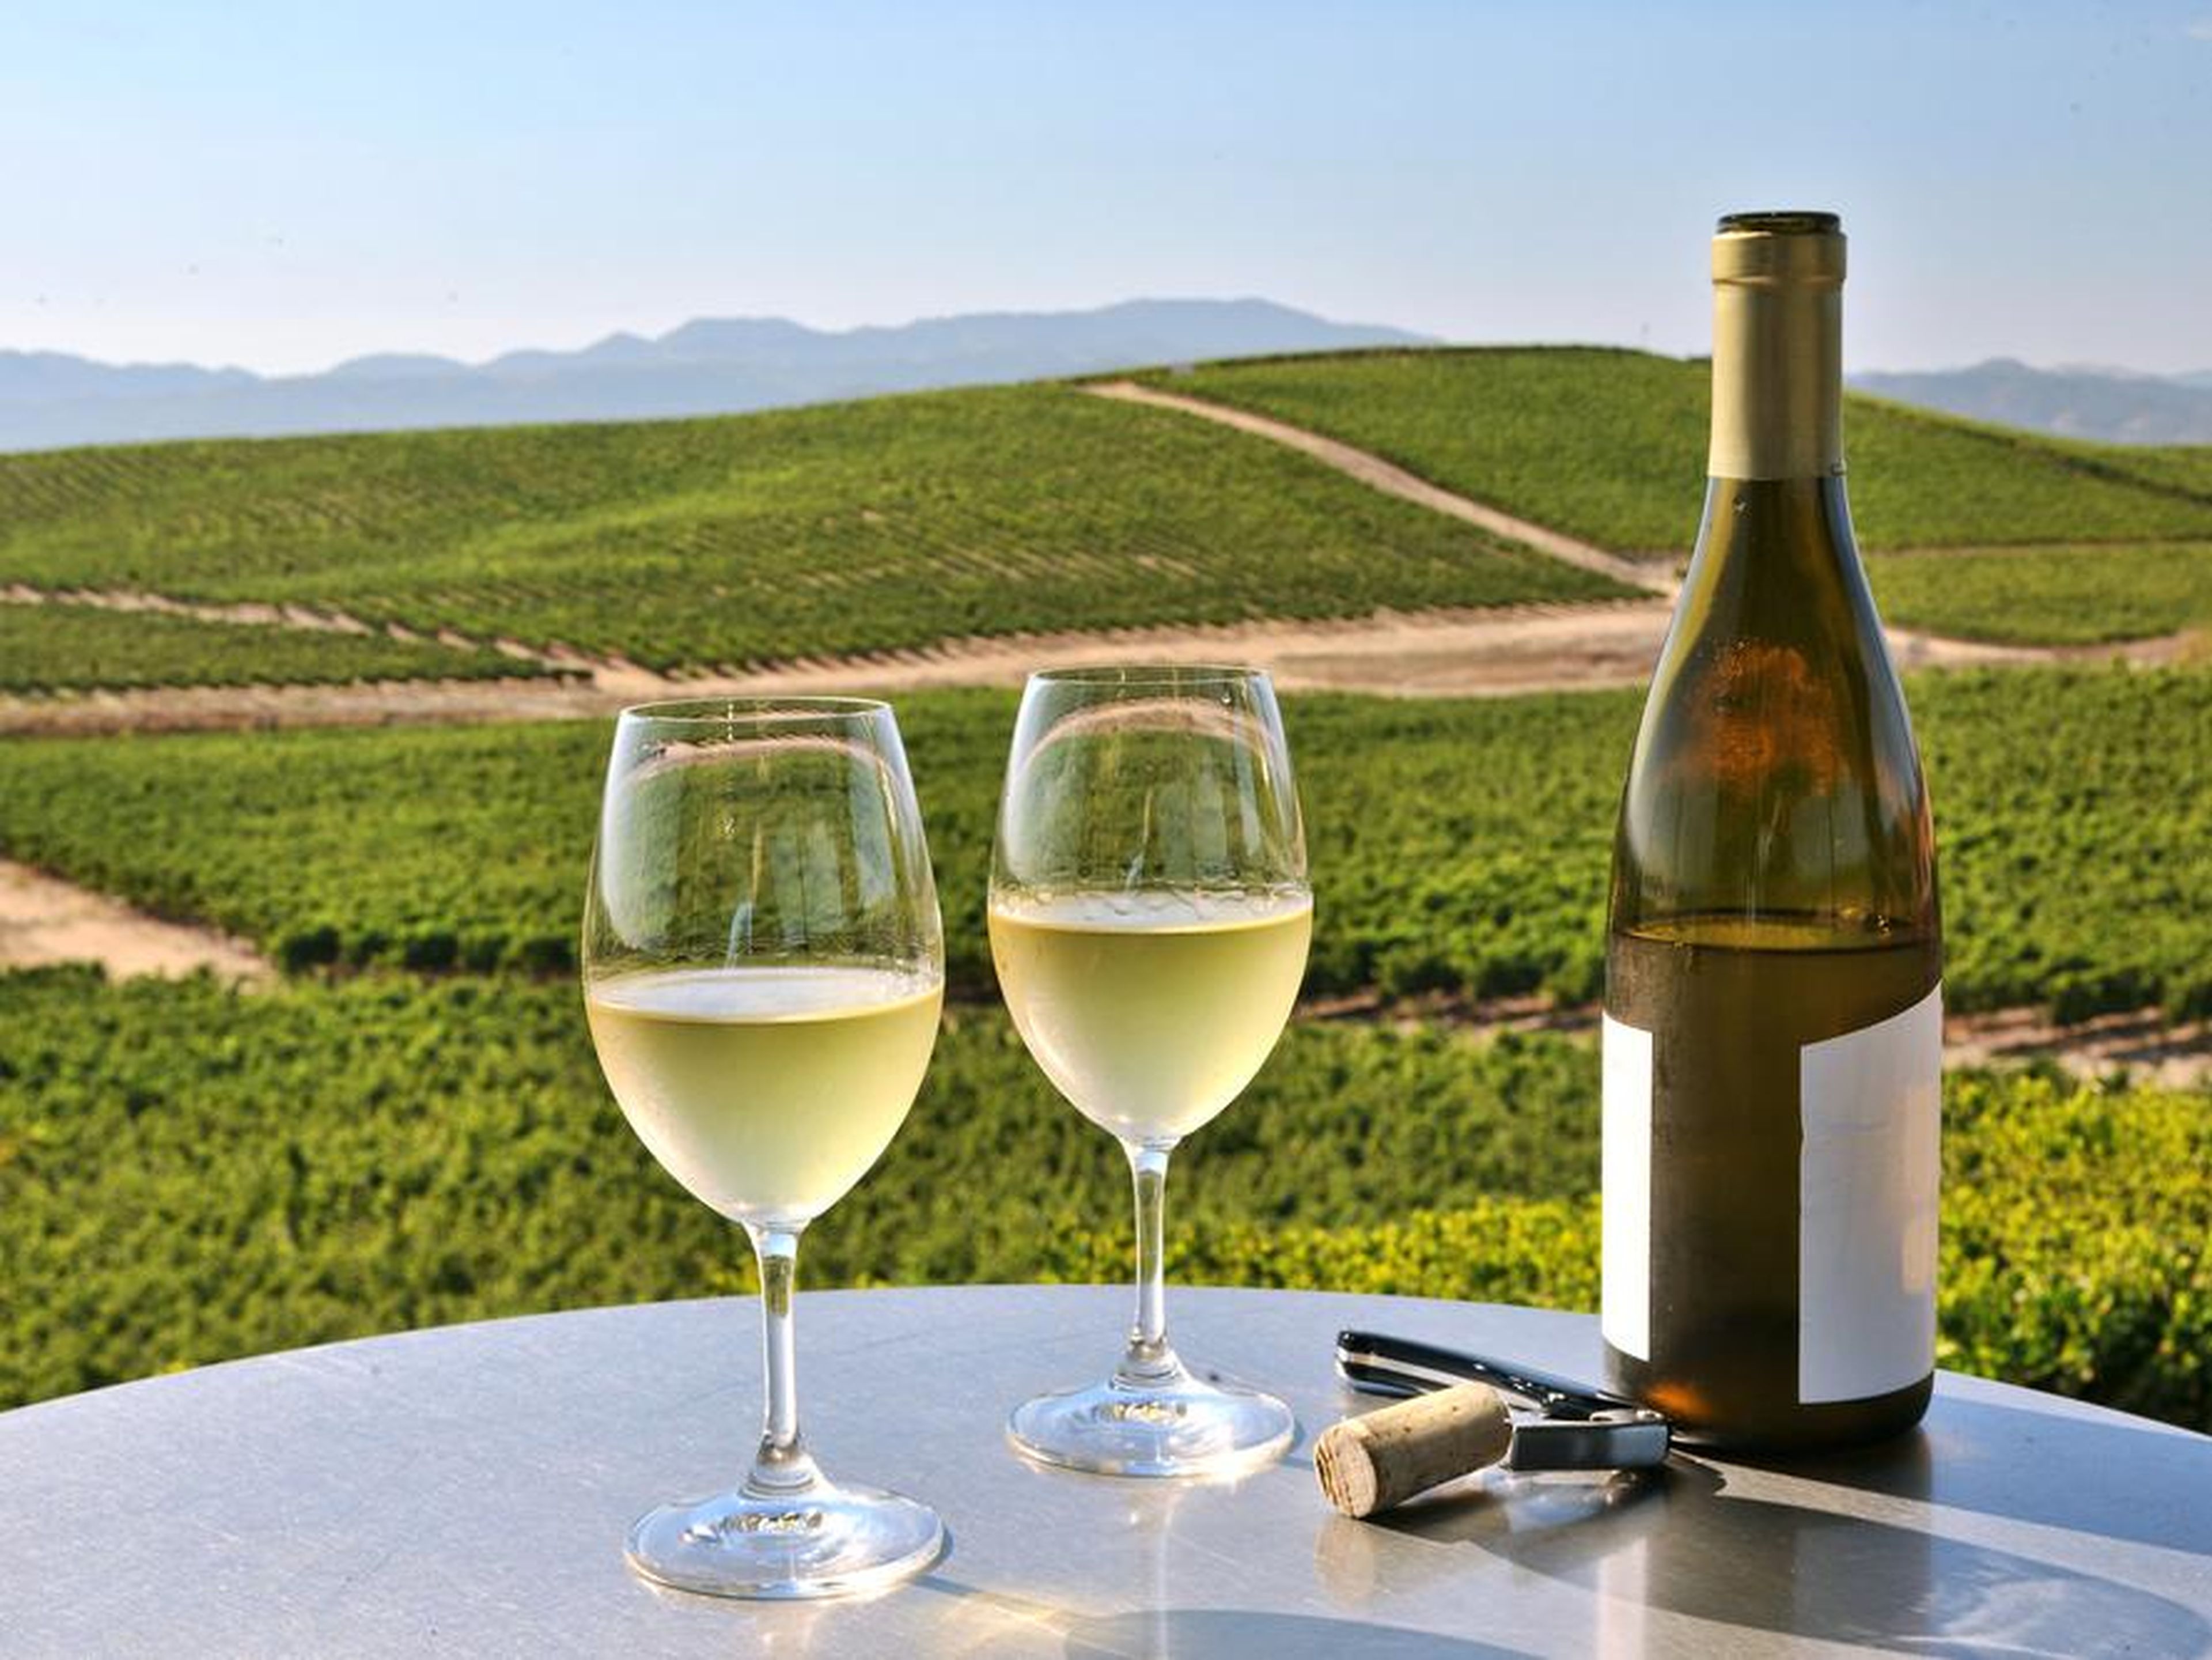 The vineyards of Napa Valley in California are considered to be a top-notch wine destination.